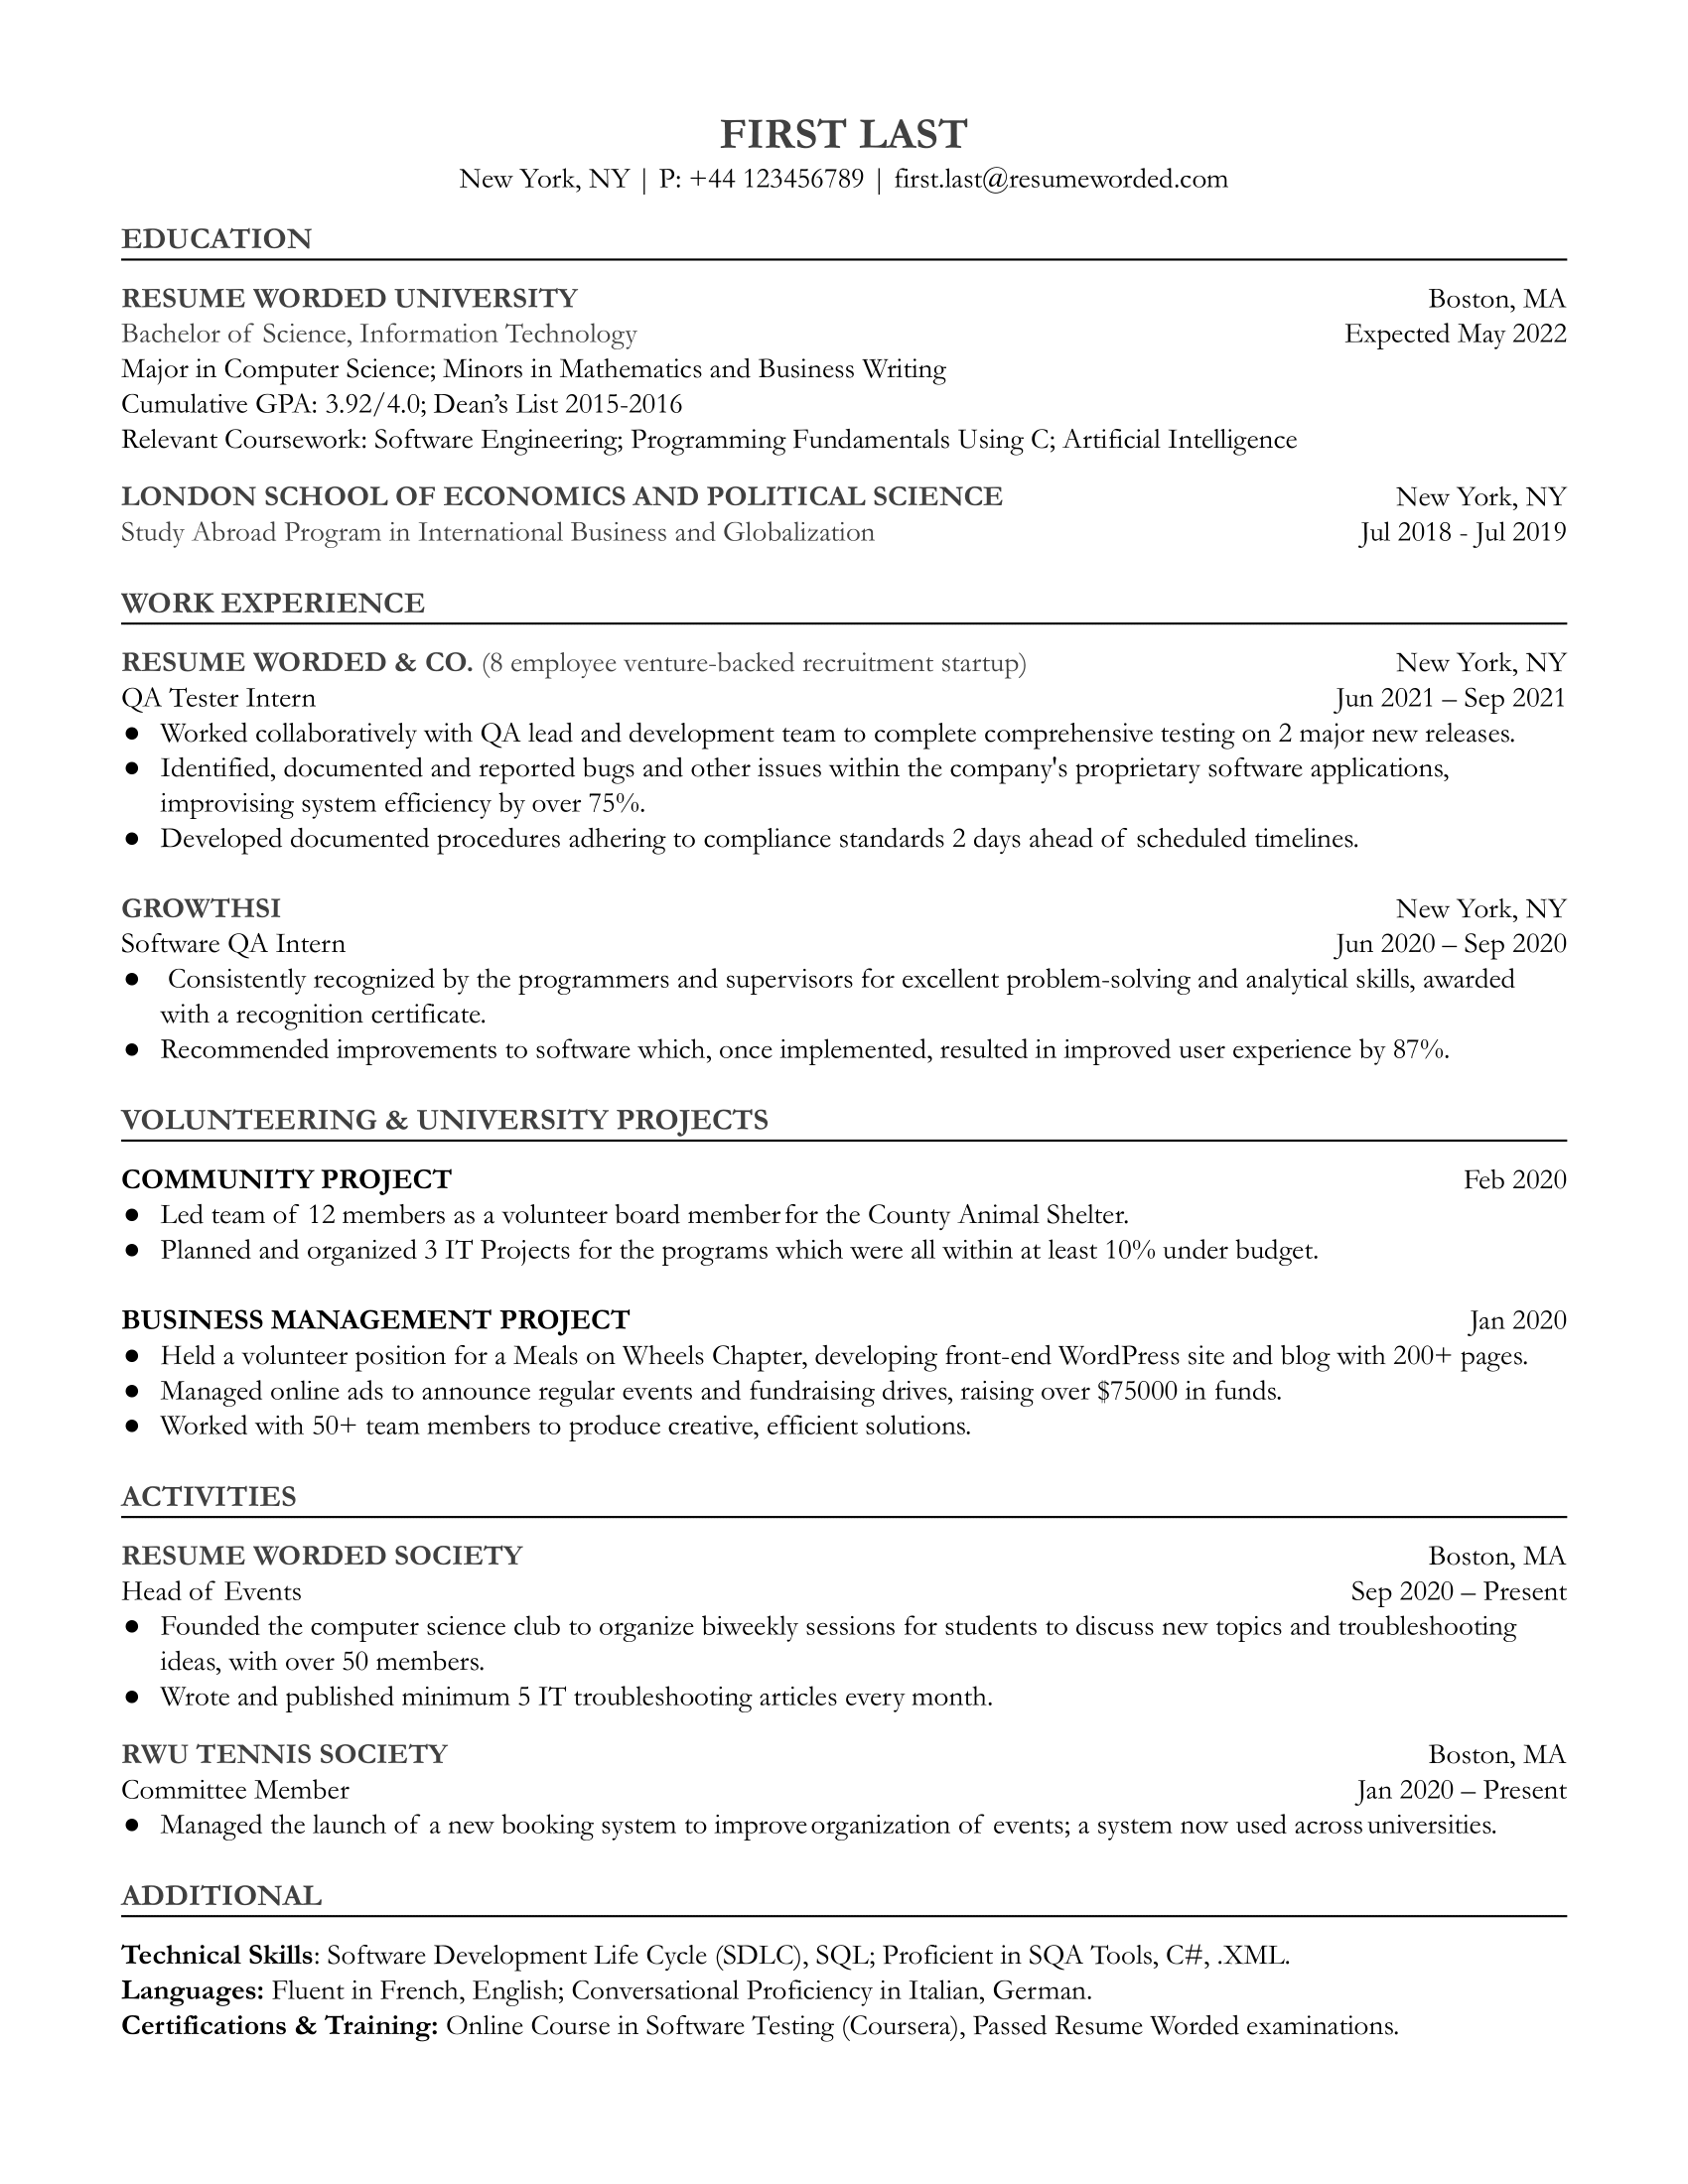 Entry-level QA tester resume with emphasis on testing methodologies and automation skills.